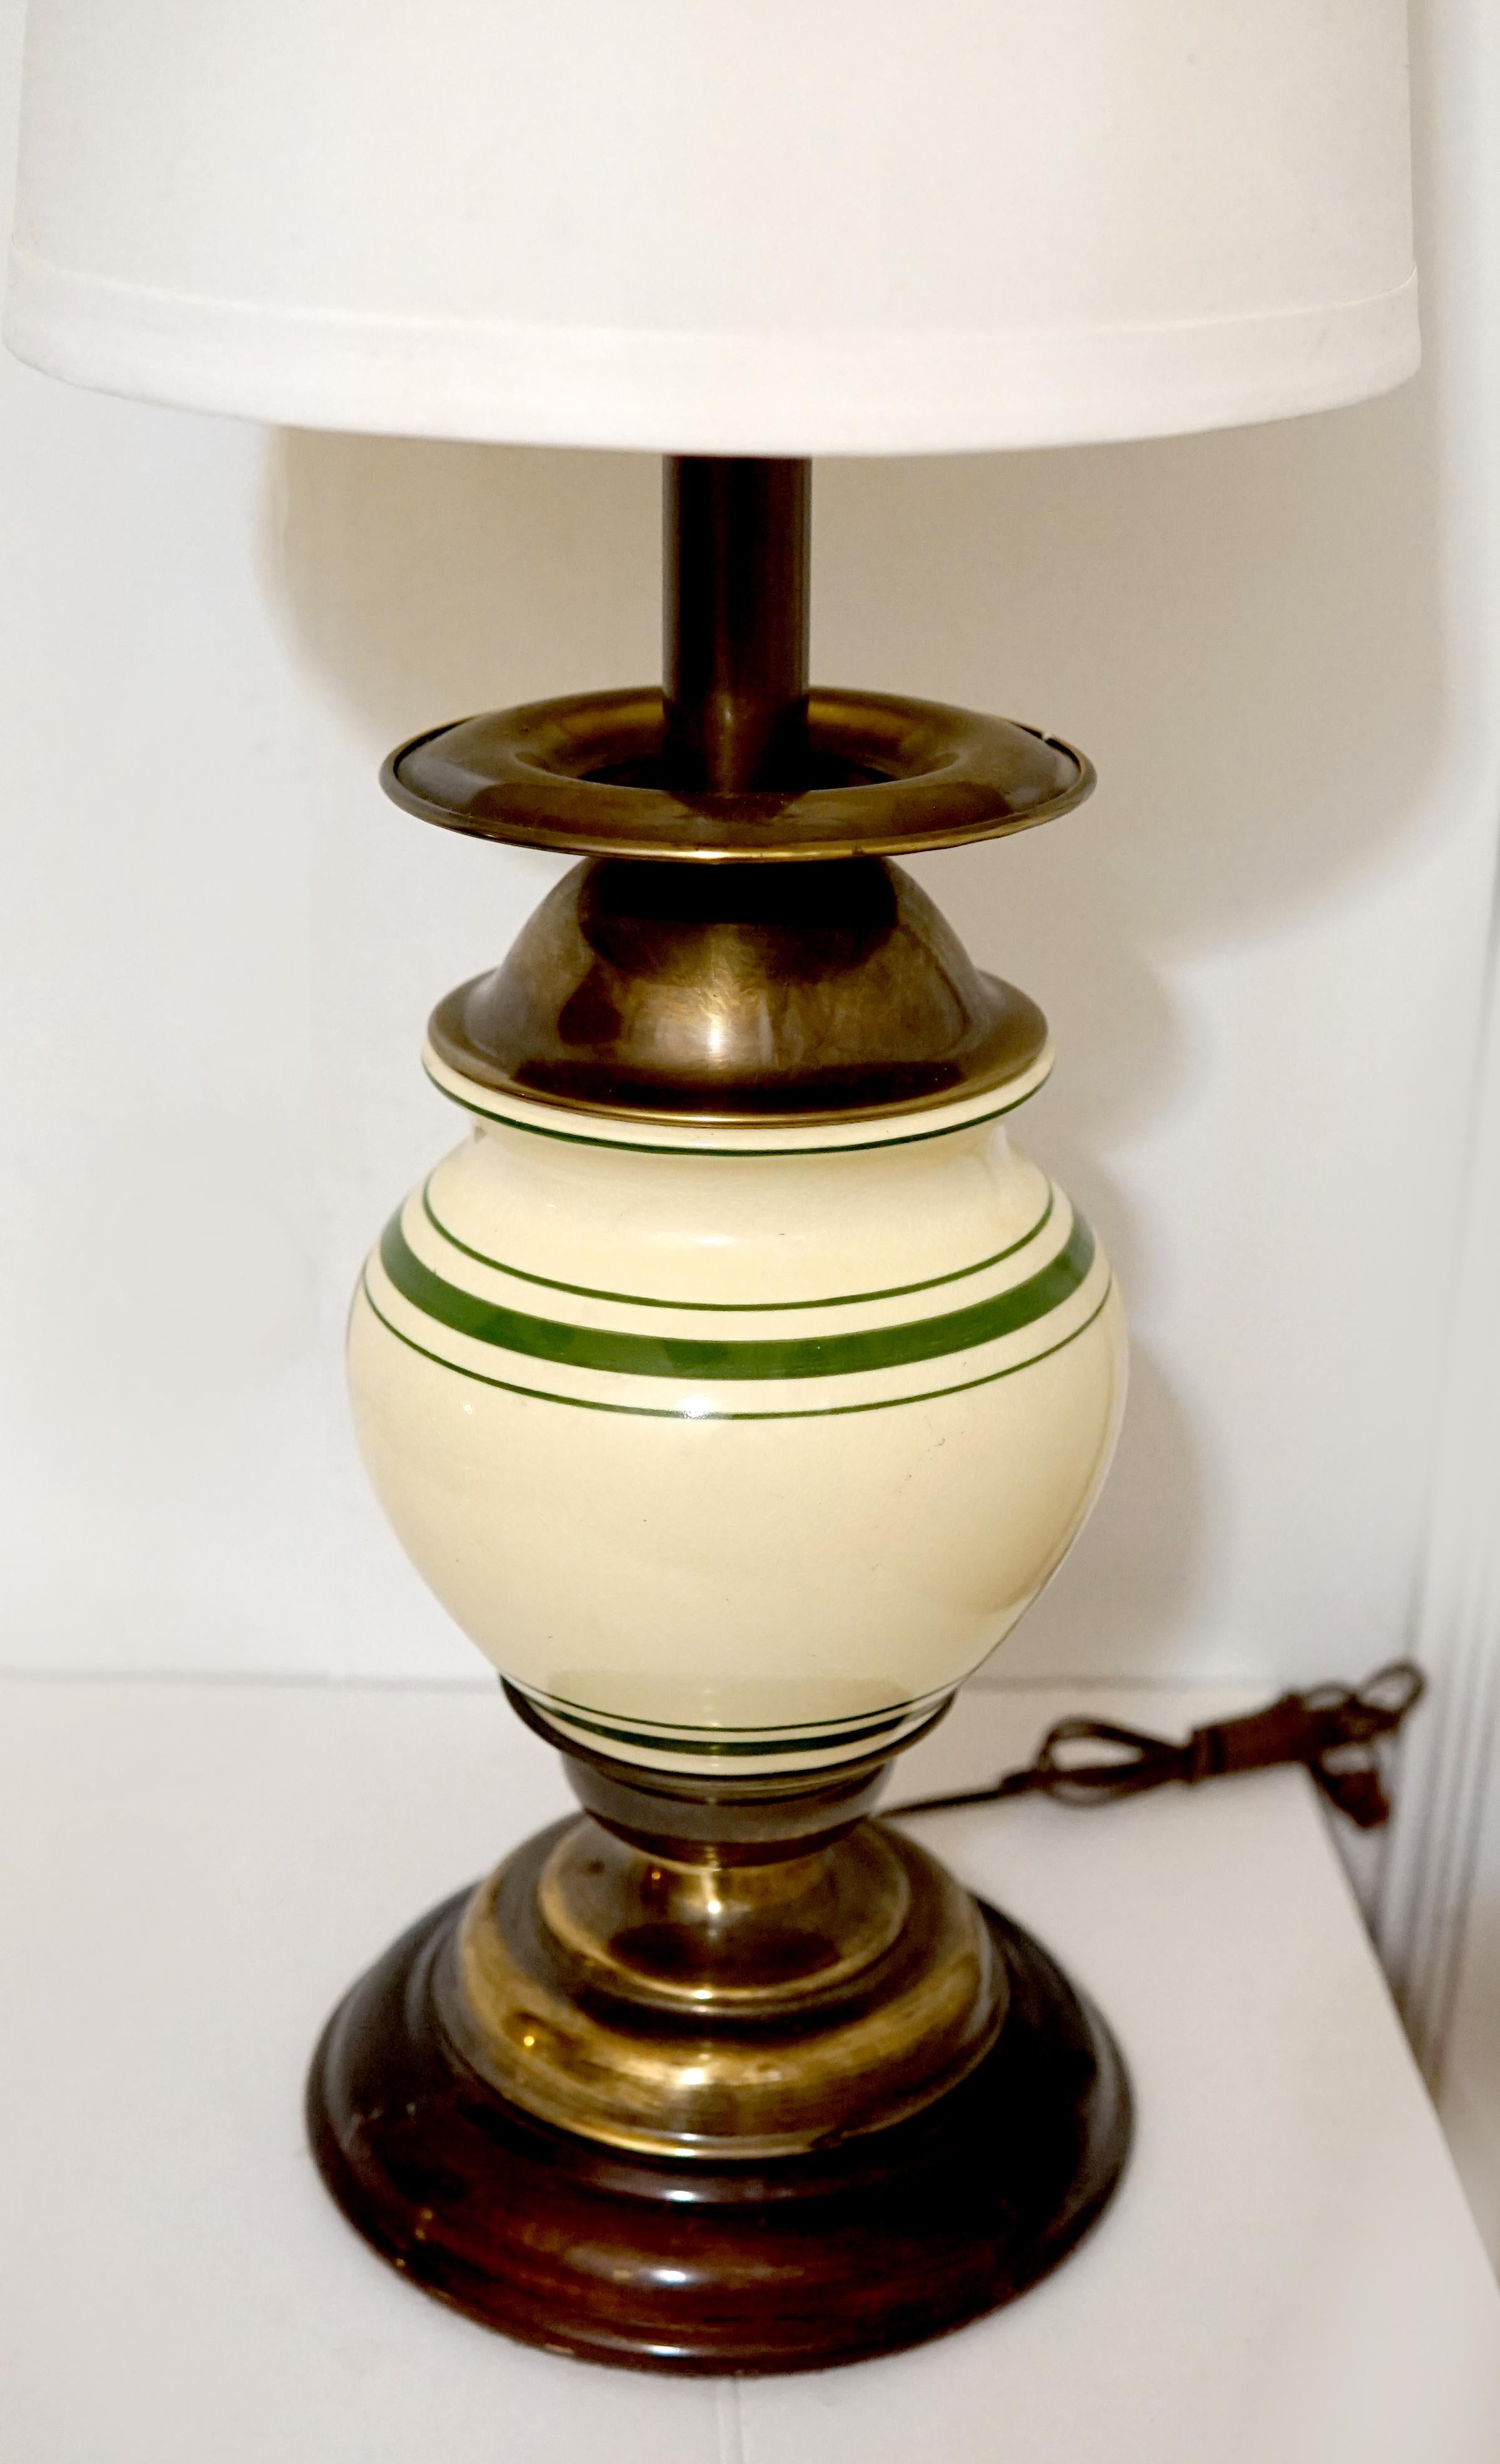 The Stiffel lamp is eggshell color and ovoid  shape. The contrast of the burnished brass and the light tan porcelain is beautiful. The circumference of the lamp is decorated with two green stripes. But a standout feature of this American classic is